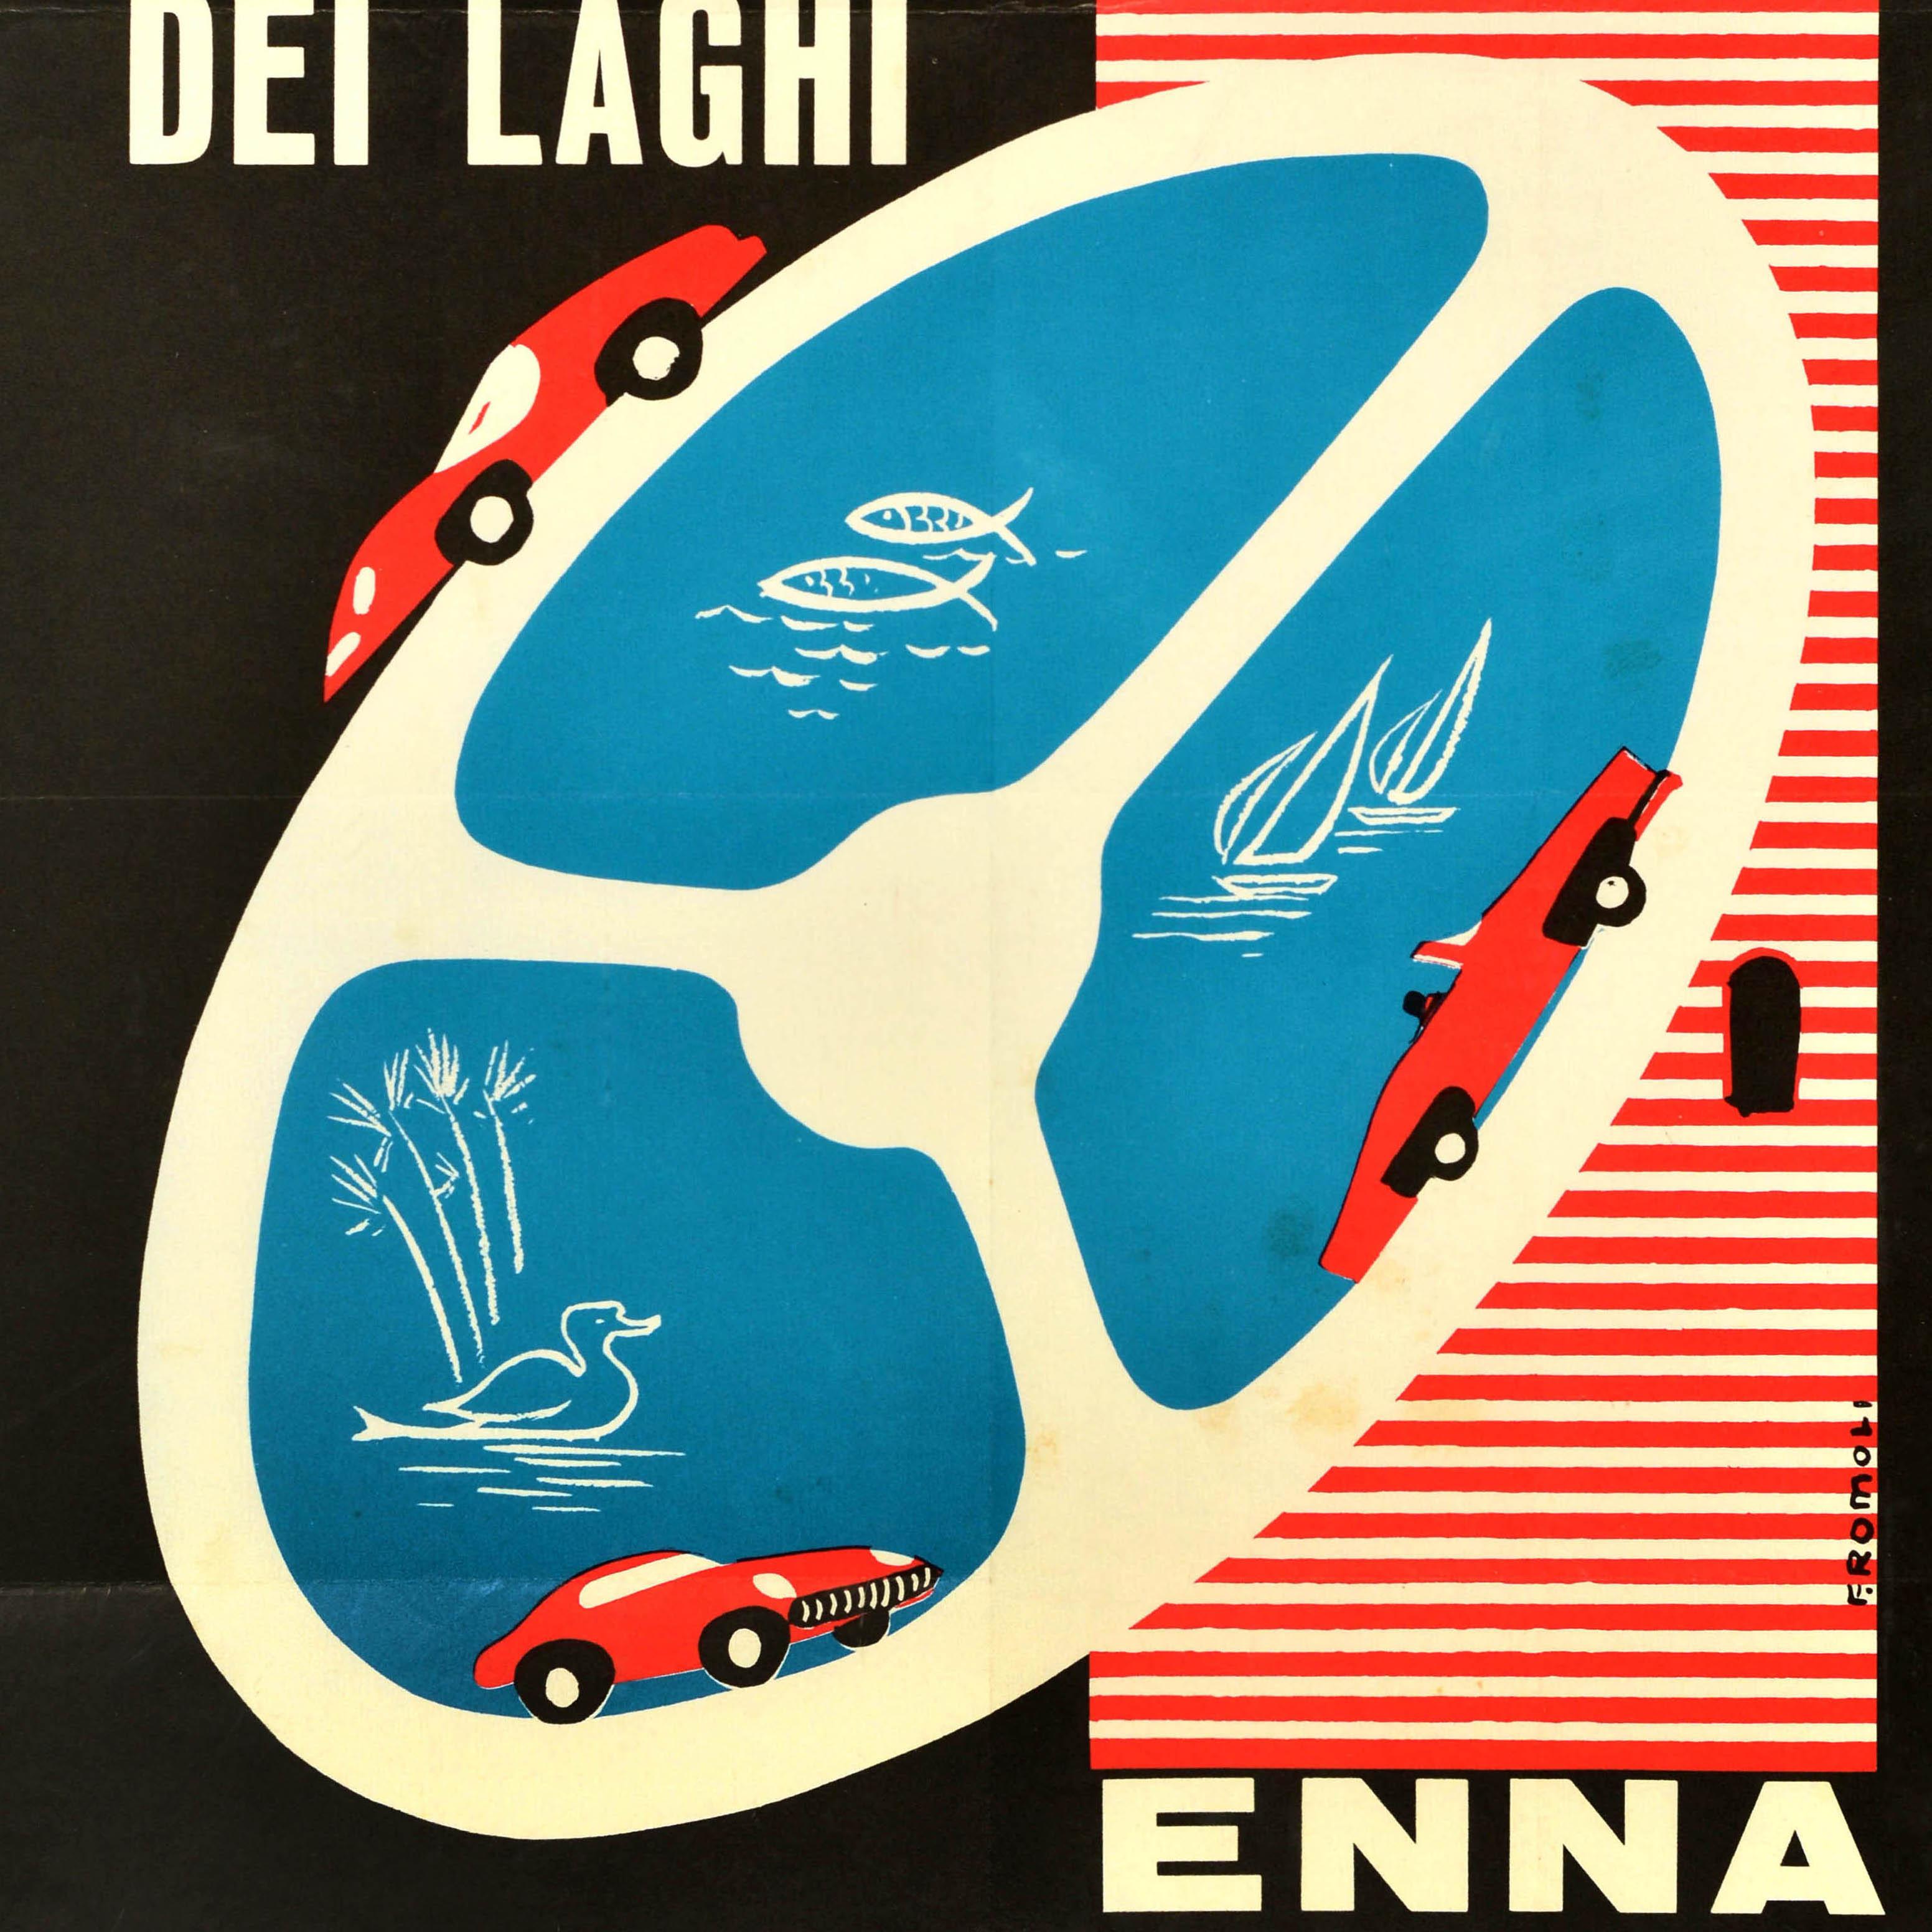 Original vintage sport event poster for the VI Raid Dei Laghi motor race held by the Enna Automobile Club on 29 June 1970 featuring a great graphic design depicting three red sports cars racing around a white steering wheel as the road around a lake